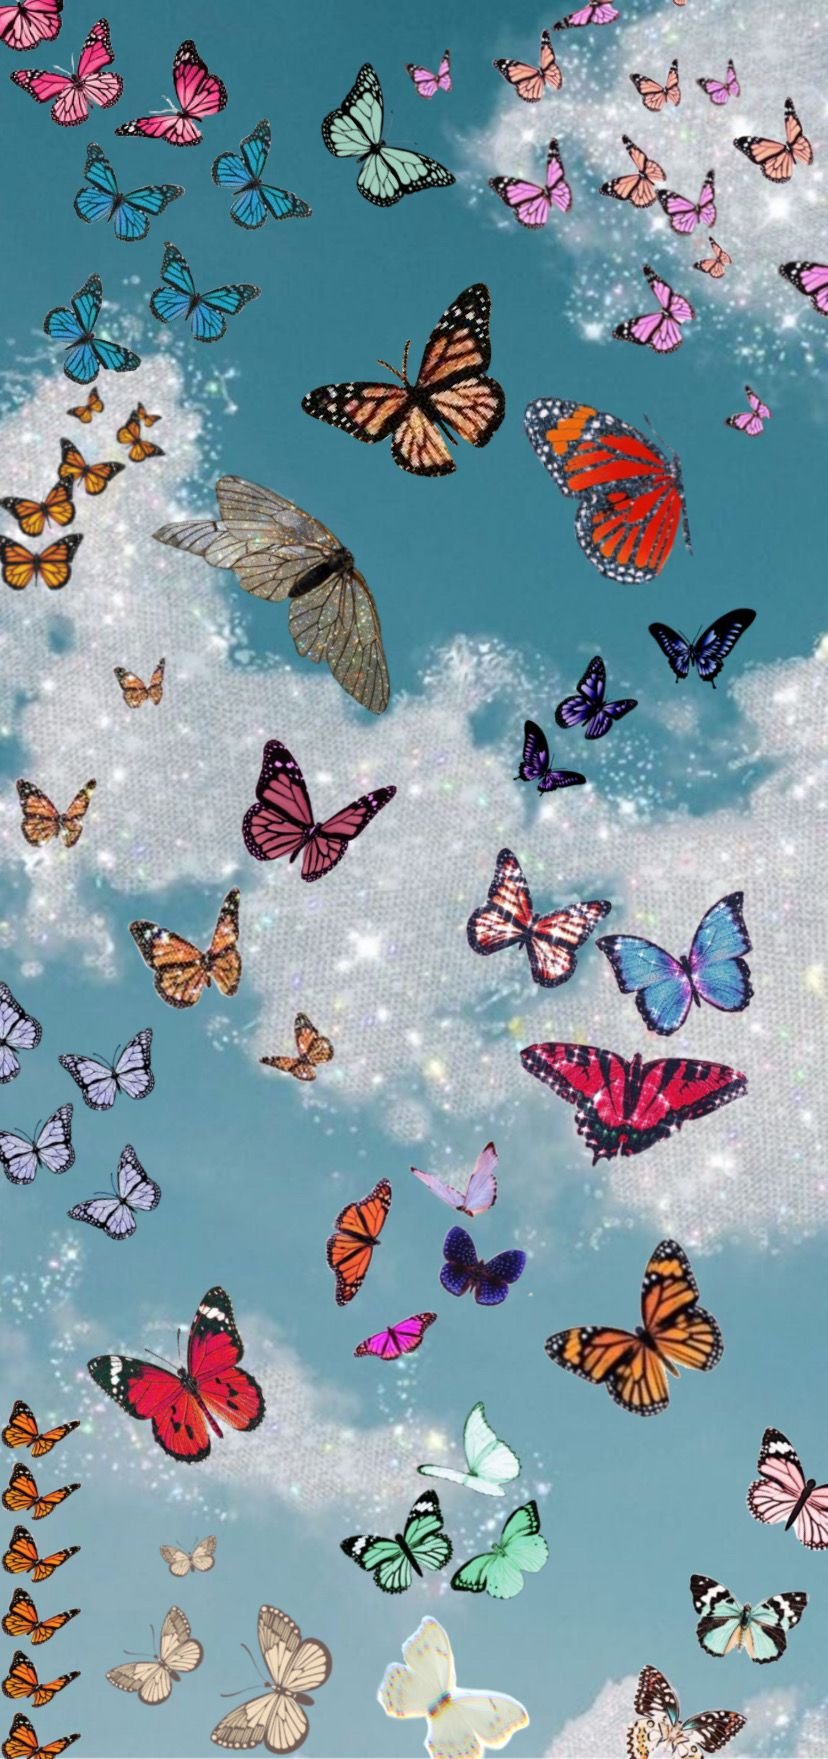 Colorful Butterflies Aesthetic Wallpaper Download  MobCup